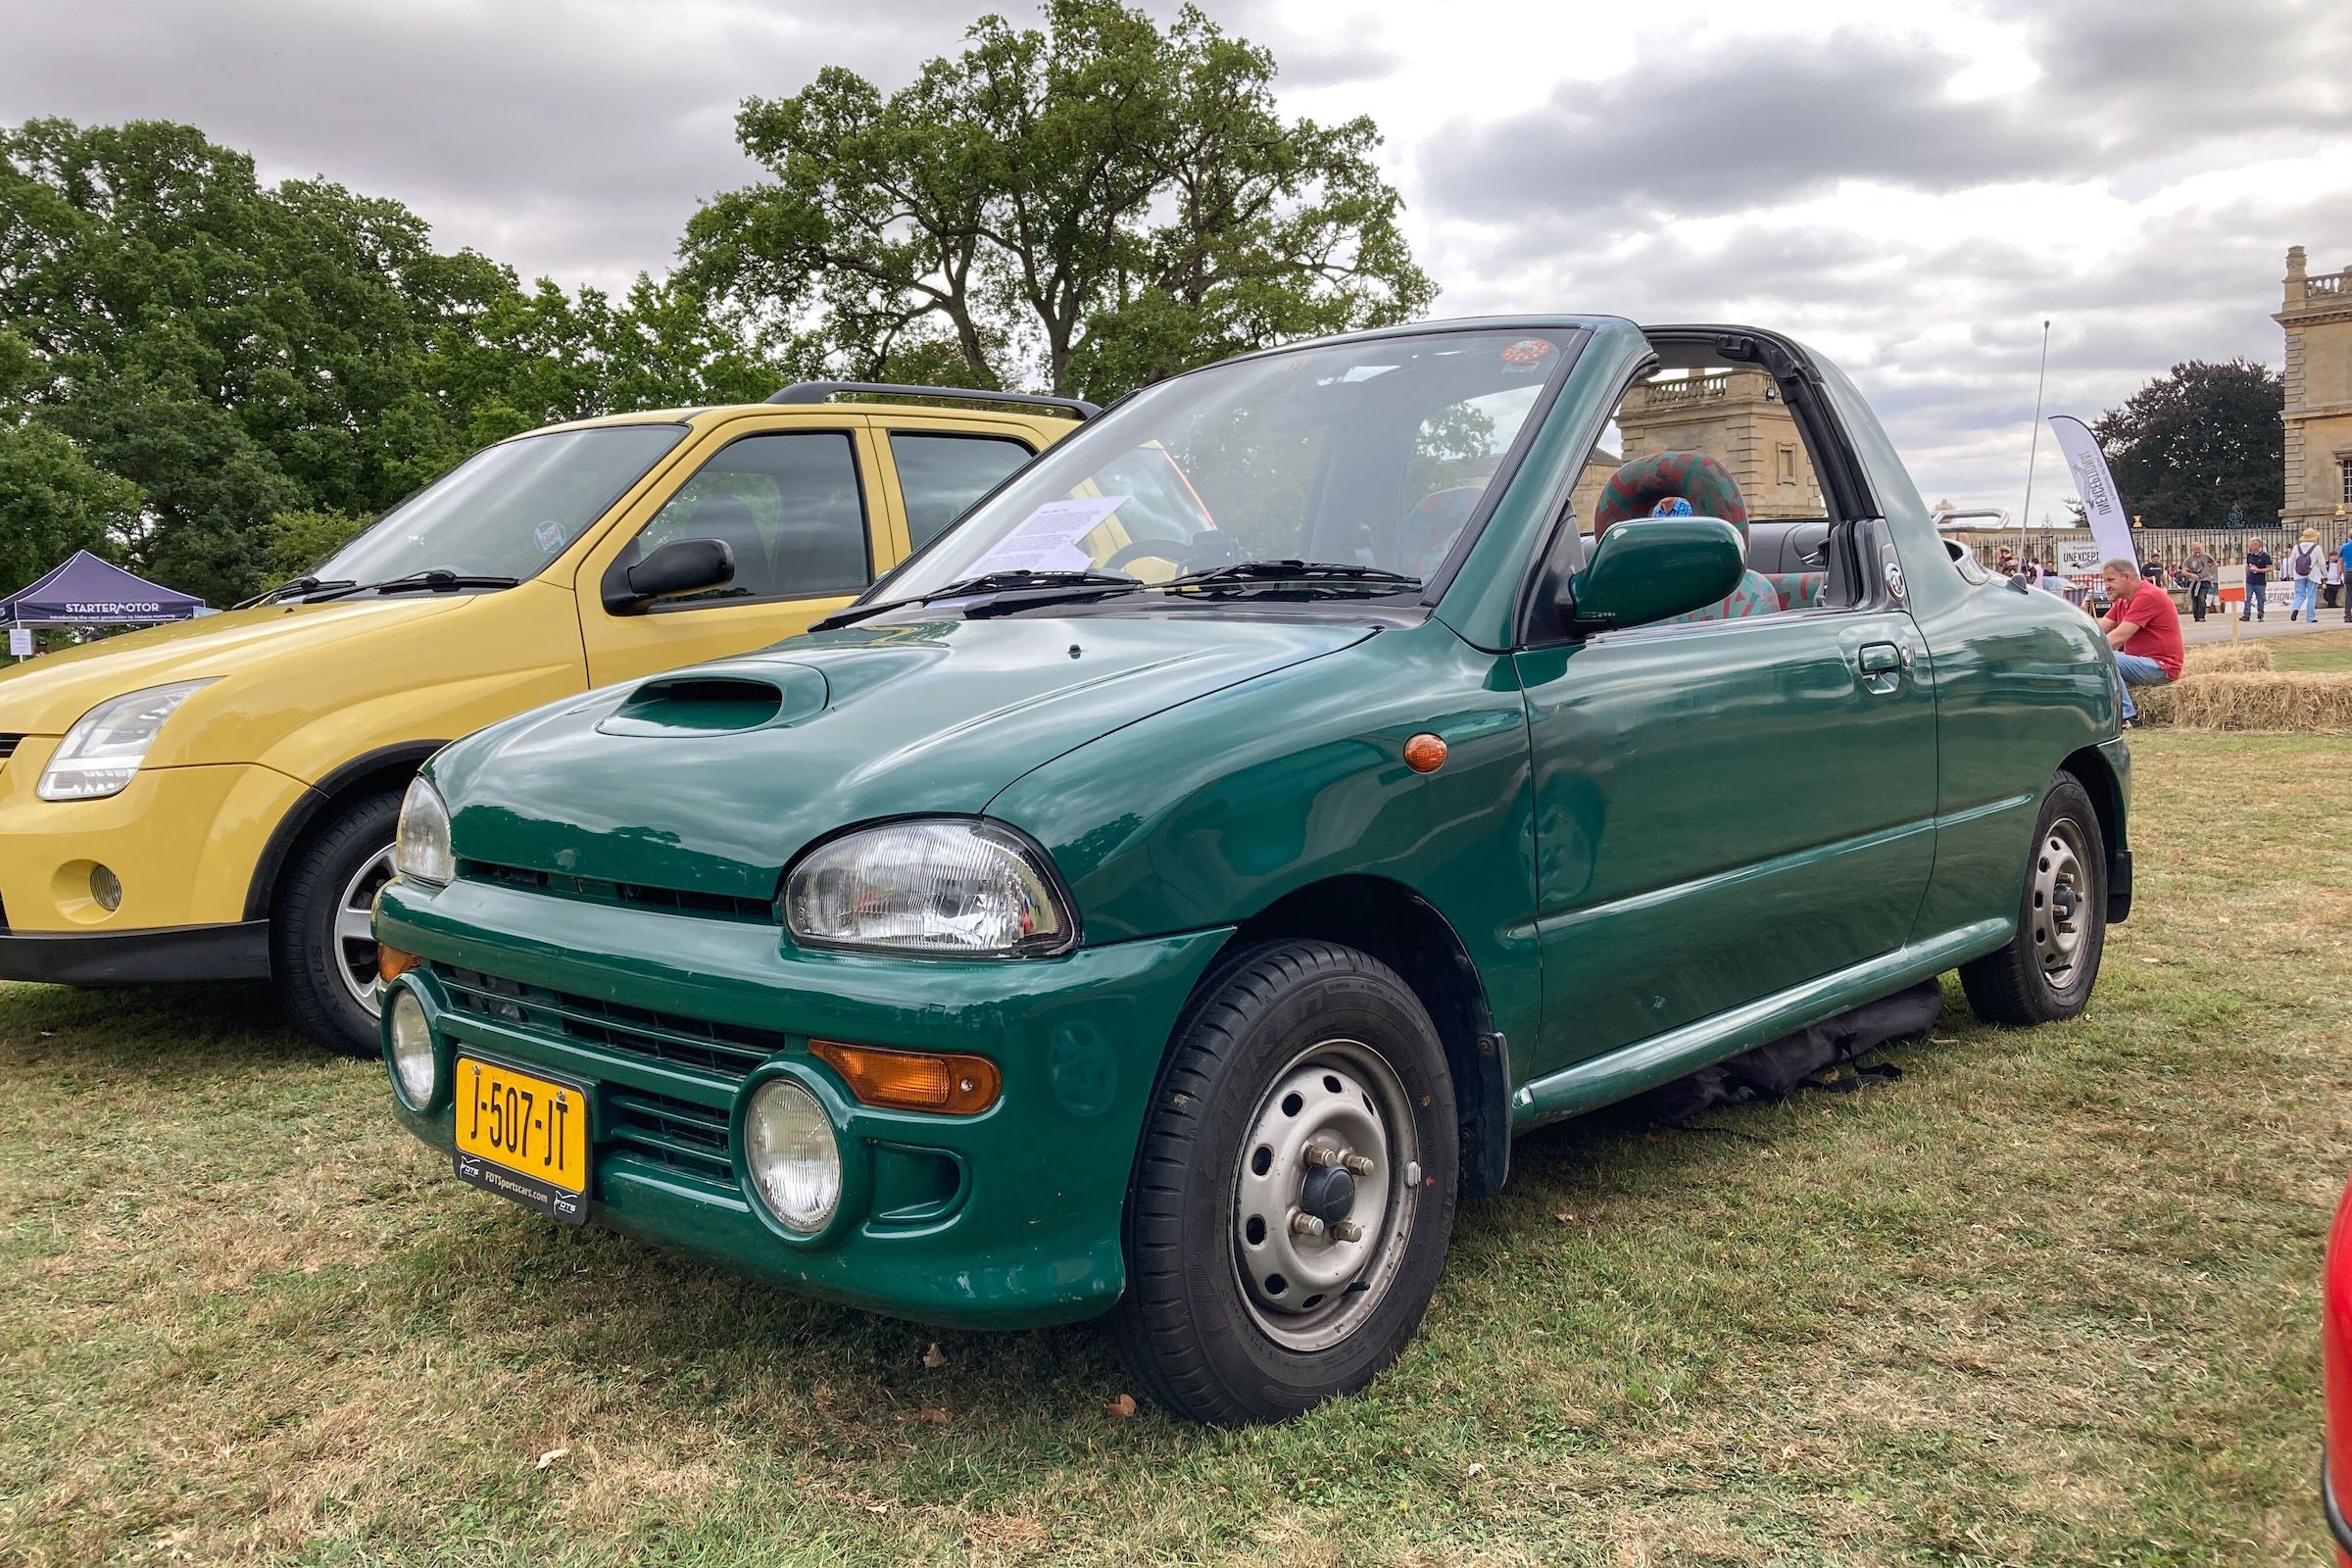 This Subaru Vivio T-Top was a splash of madness among the unexceptional